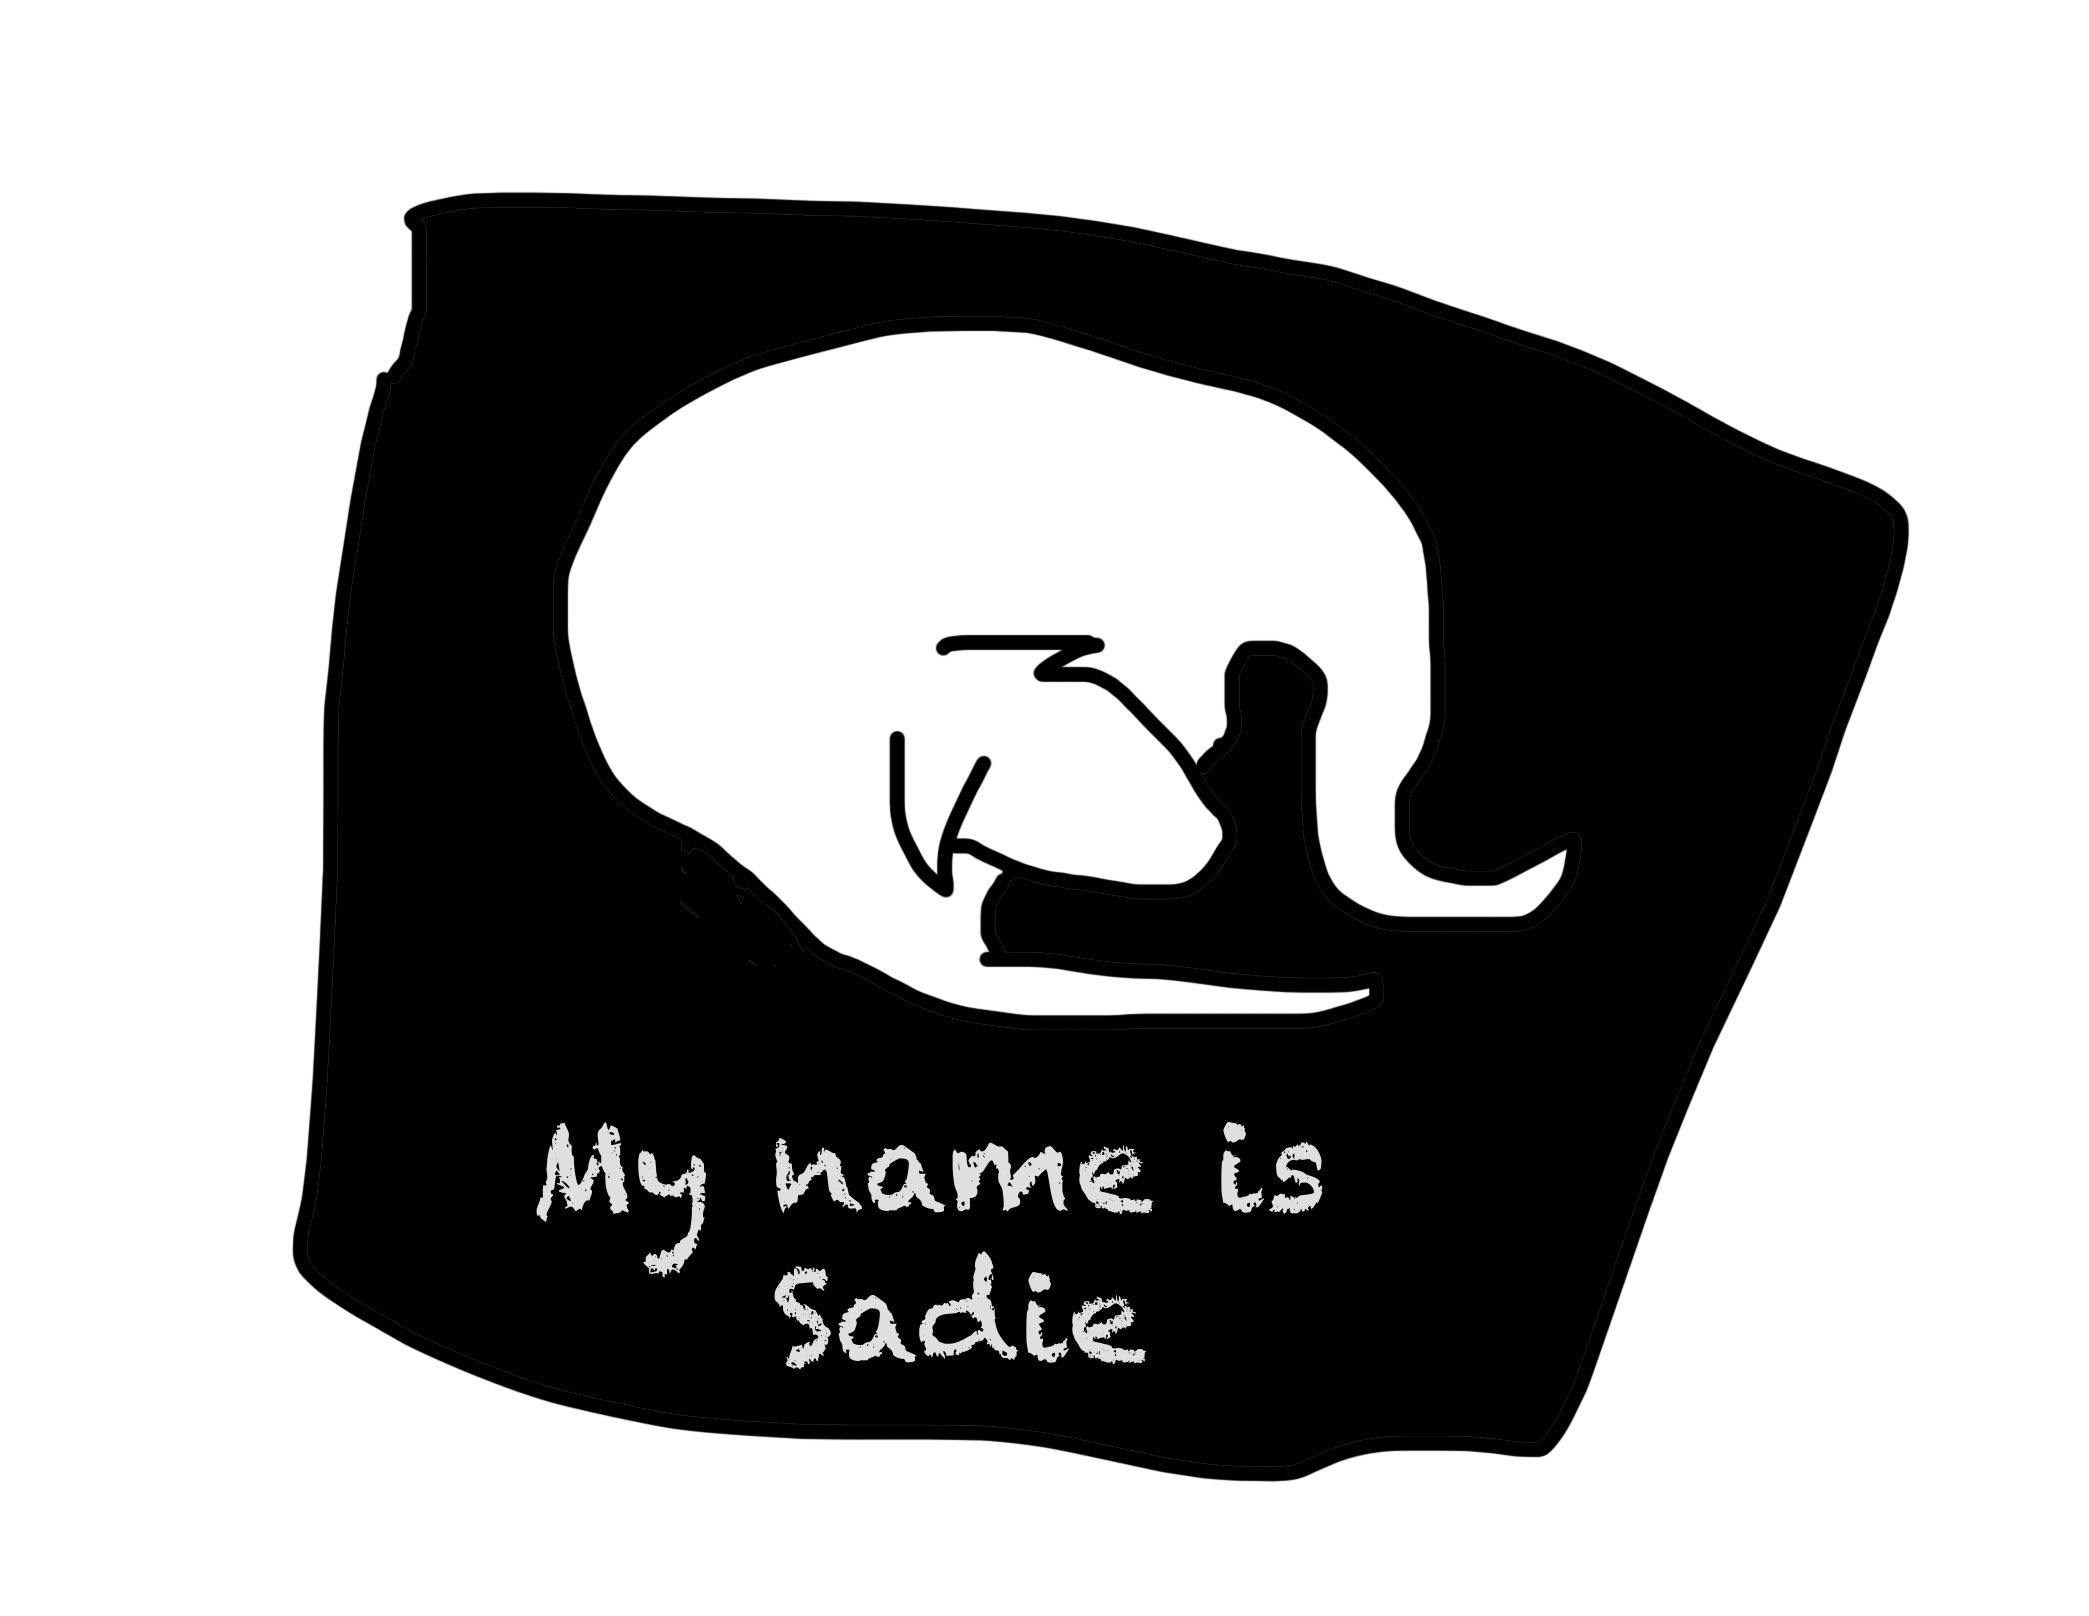 Drawing of a white dog on a black mat with text saying "My name is Sadie"